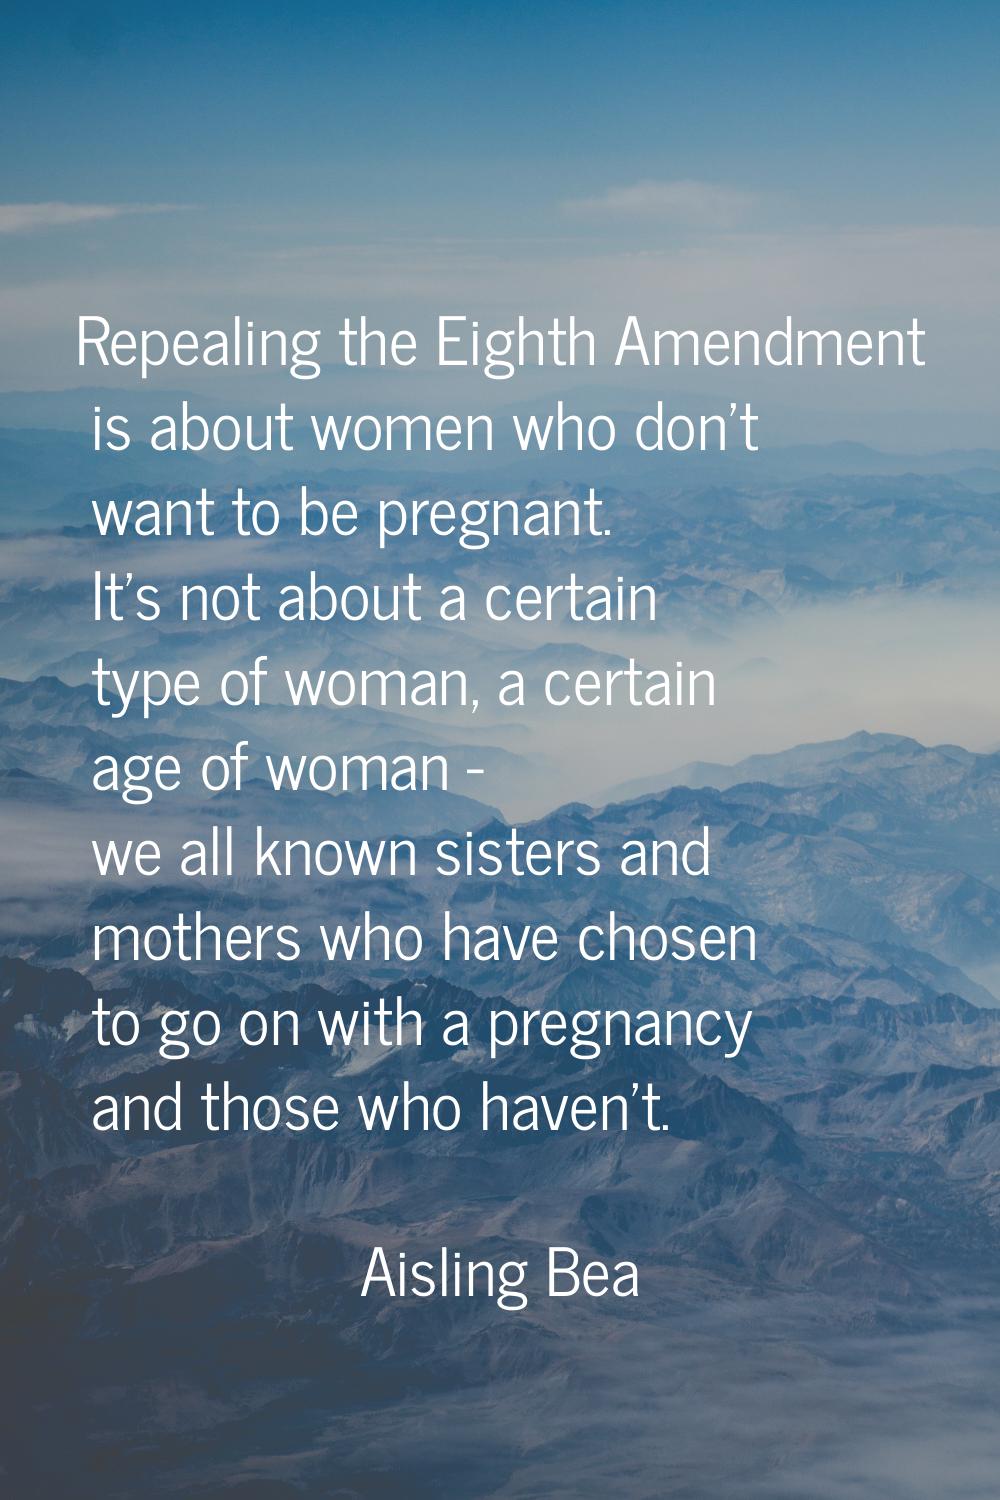 Repealing the Eighth Amendment is about women who don't want to be pregnant. It's not about a certa